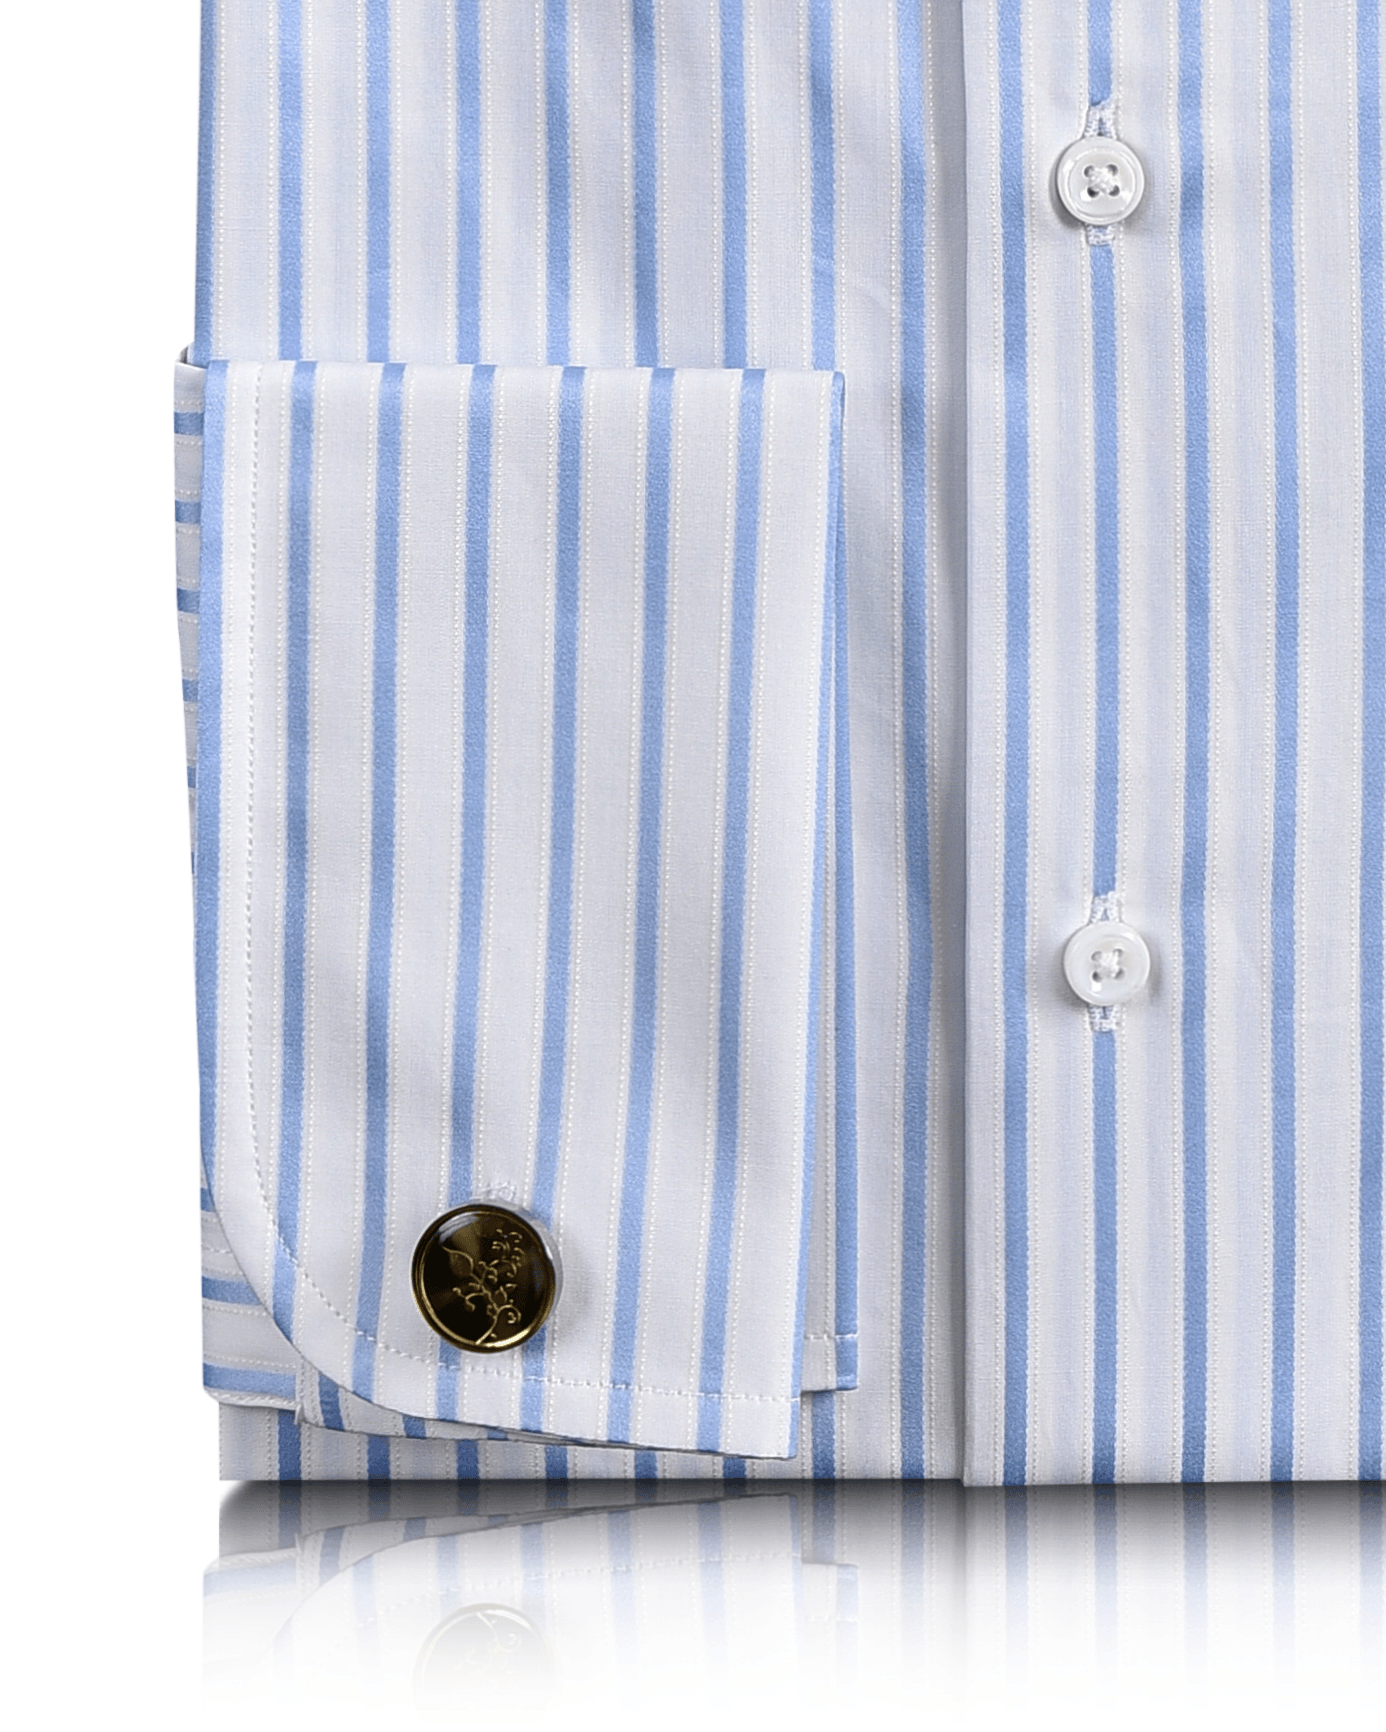 Luxire Gold - White with Blue Stripes Shirt